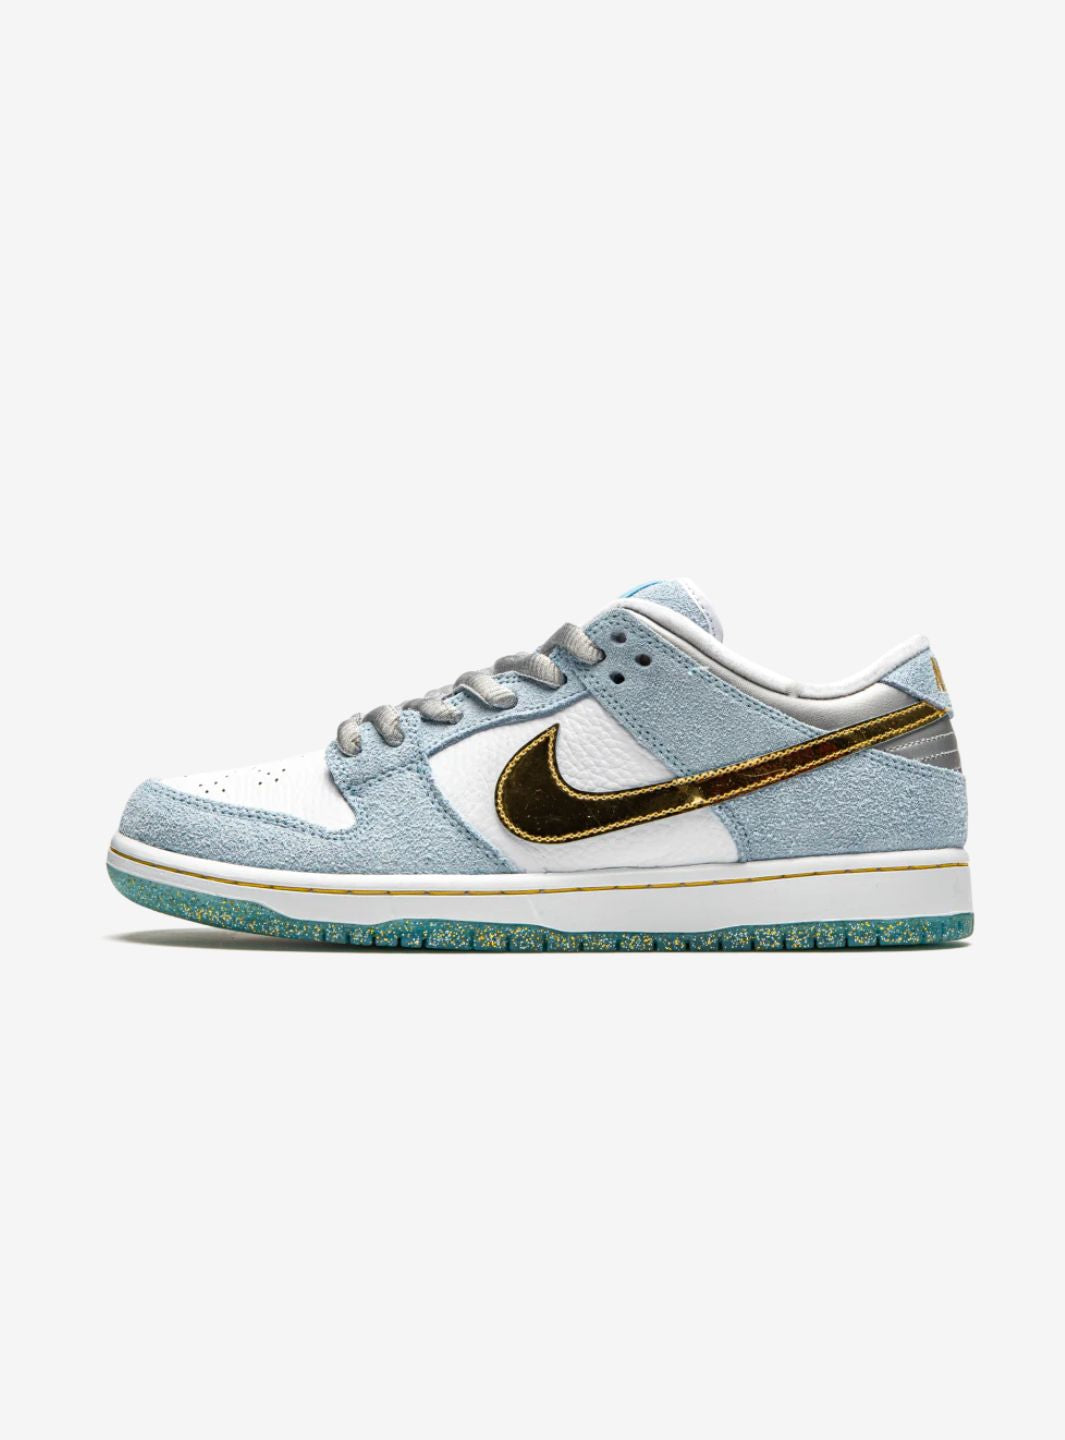 Nike SB Dunk Low Sean Cliver - DC9936-100 | ResellZone